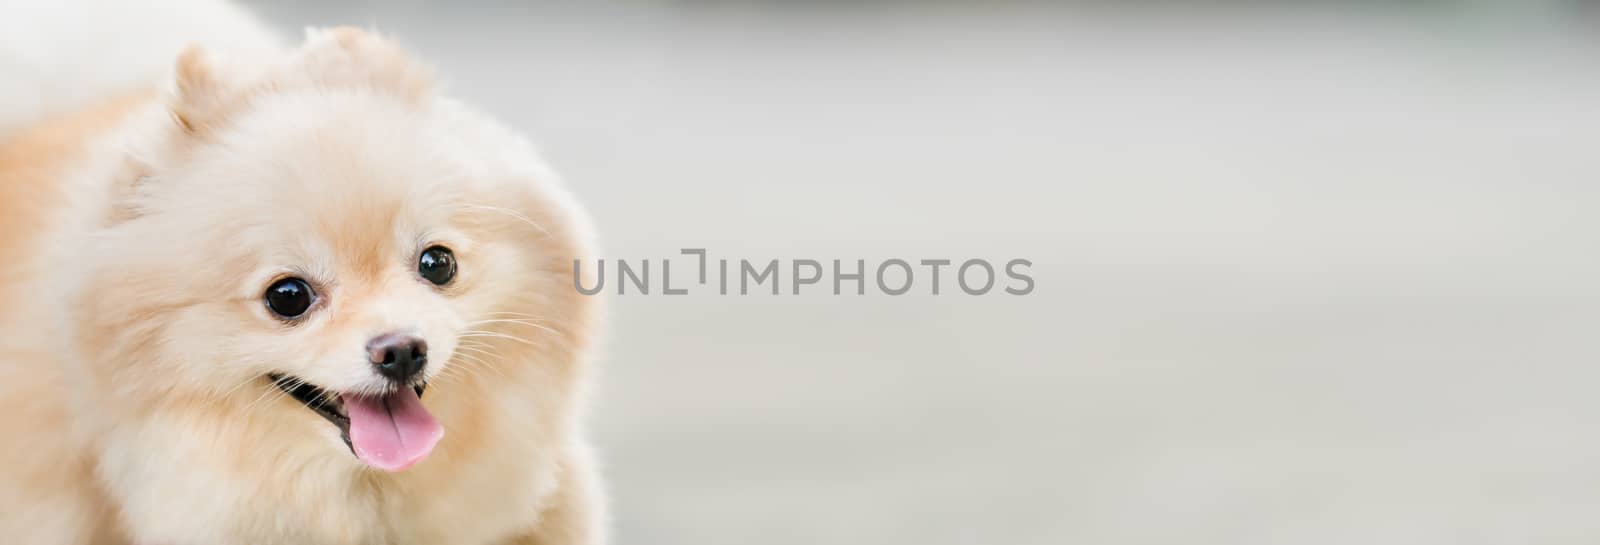 Cute pomeranian dog smiling funny, with copy space, horizontal rectangular image, focus on the eye